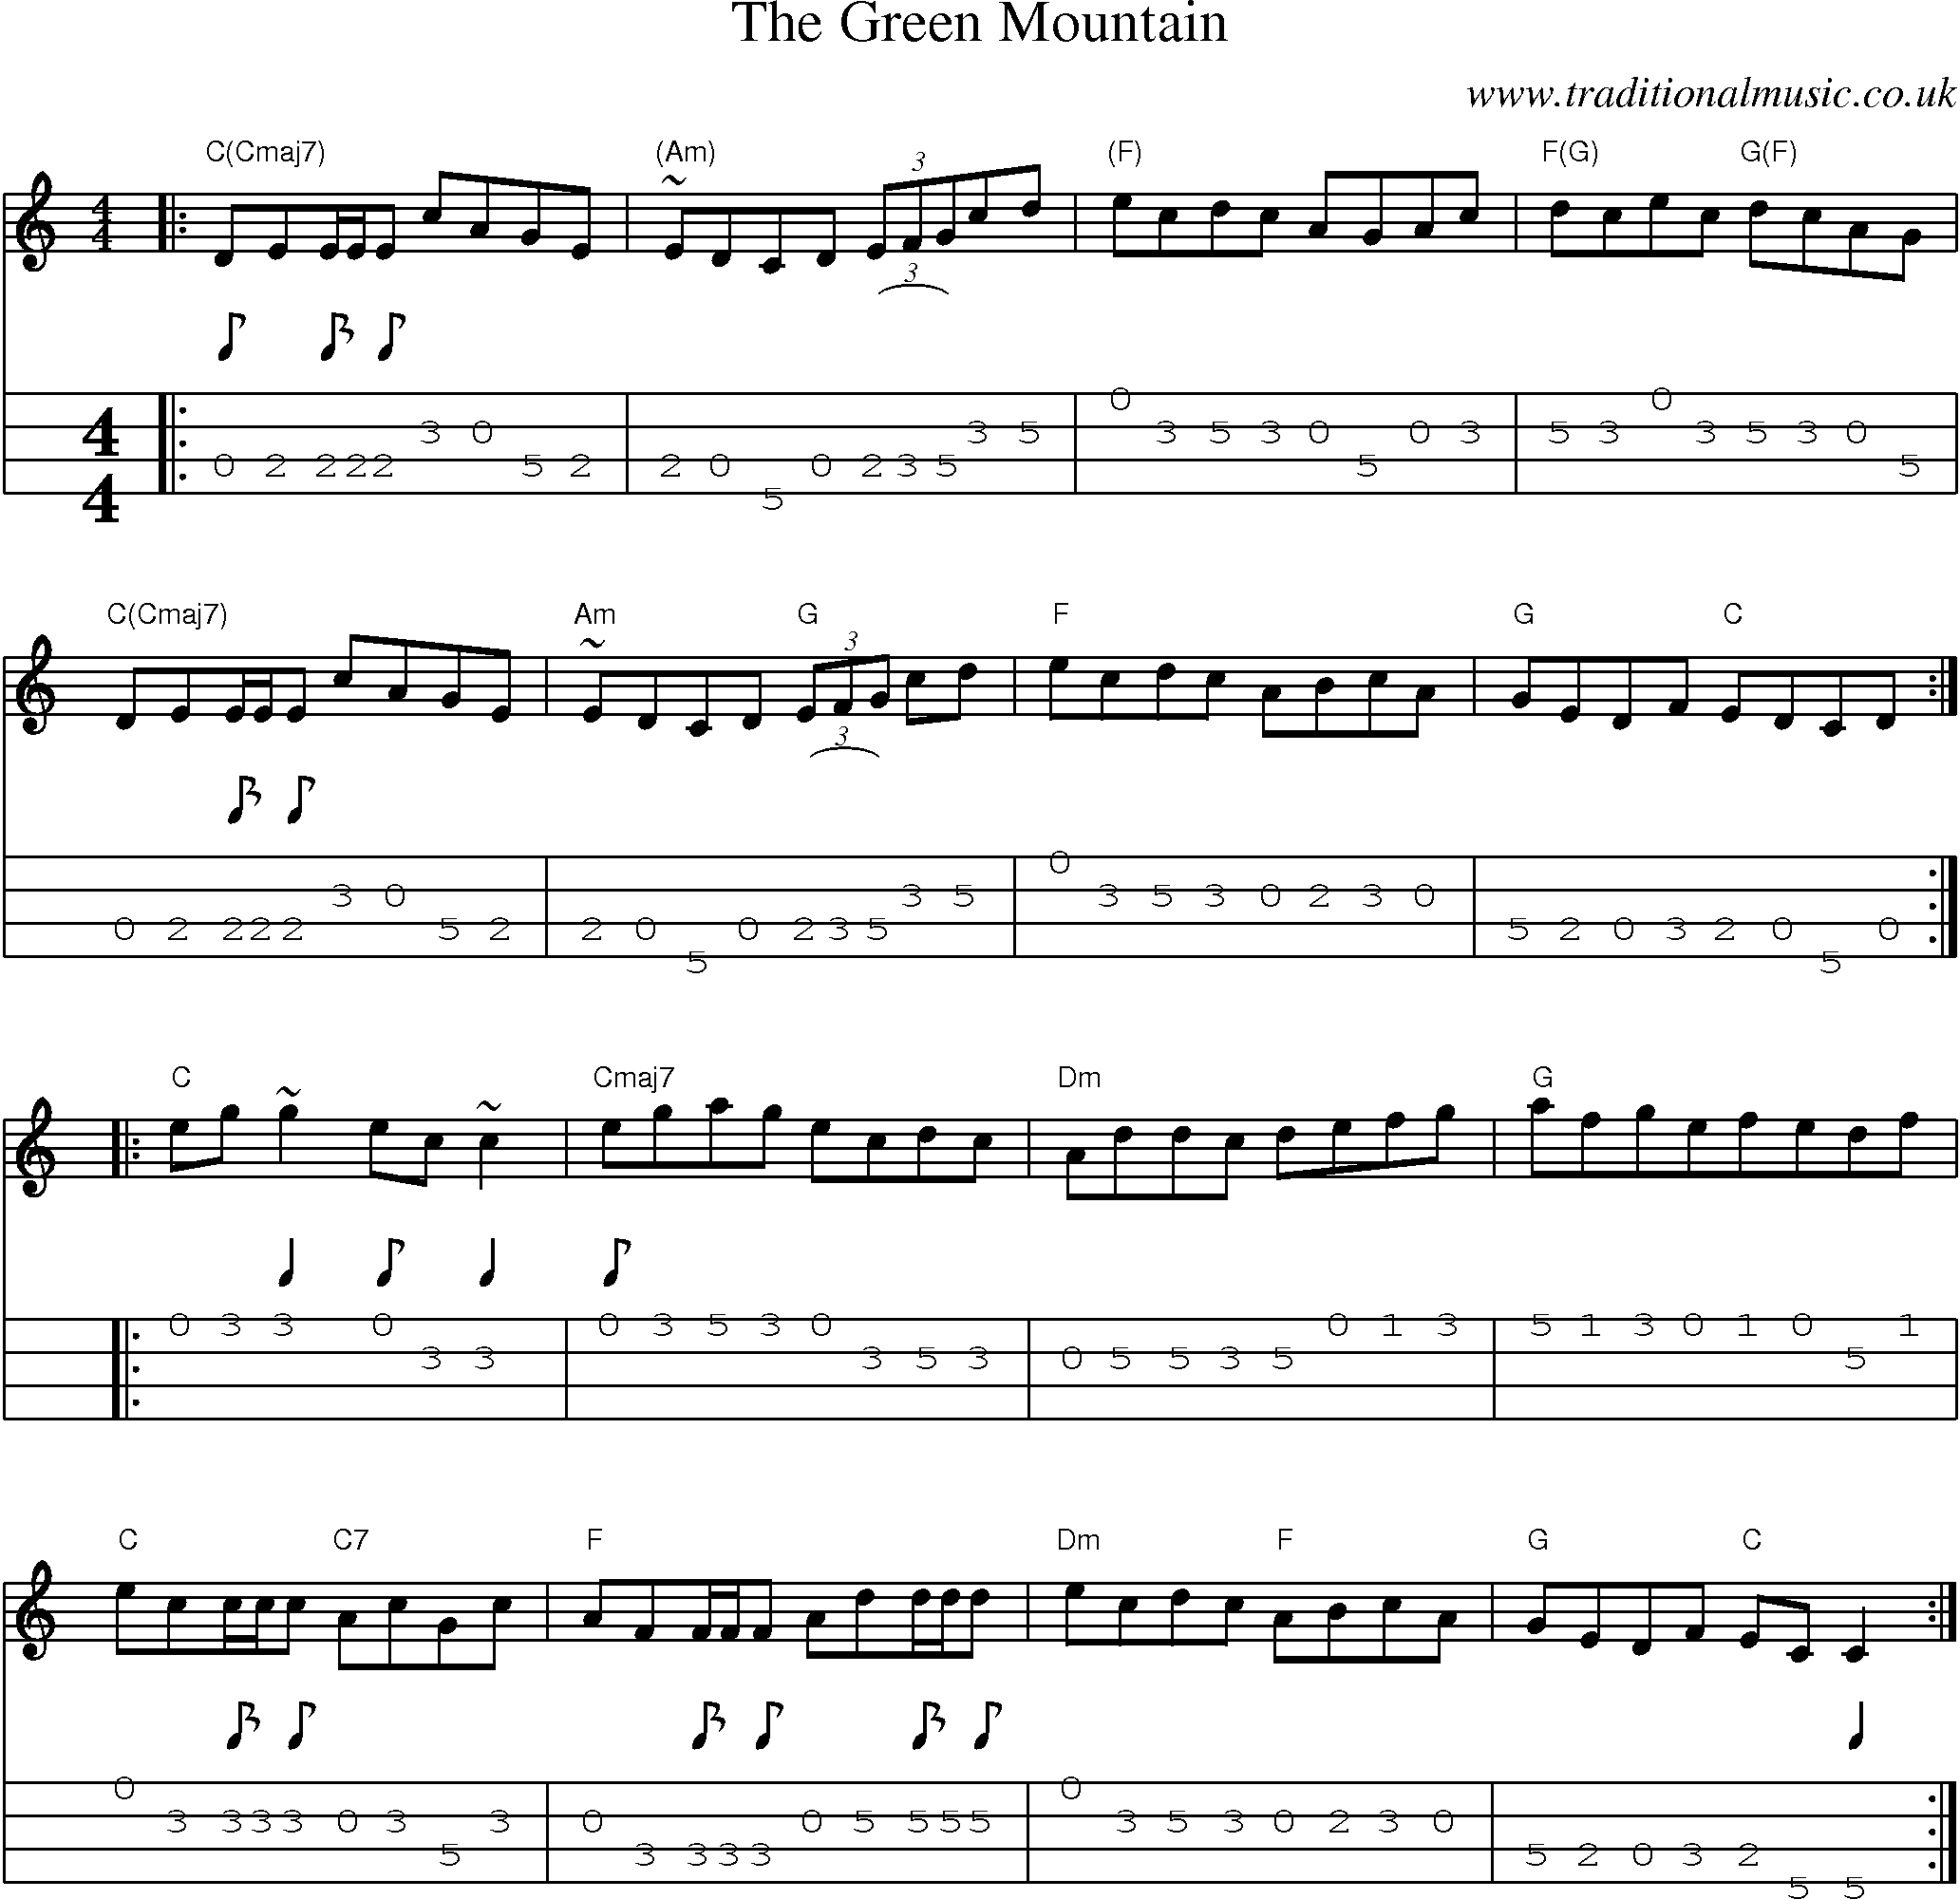 Music Score and Guitar Tabs for The Green Mountain